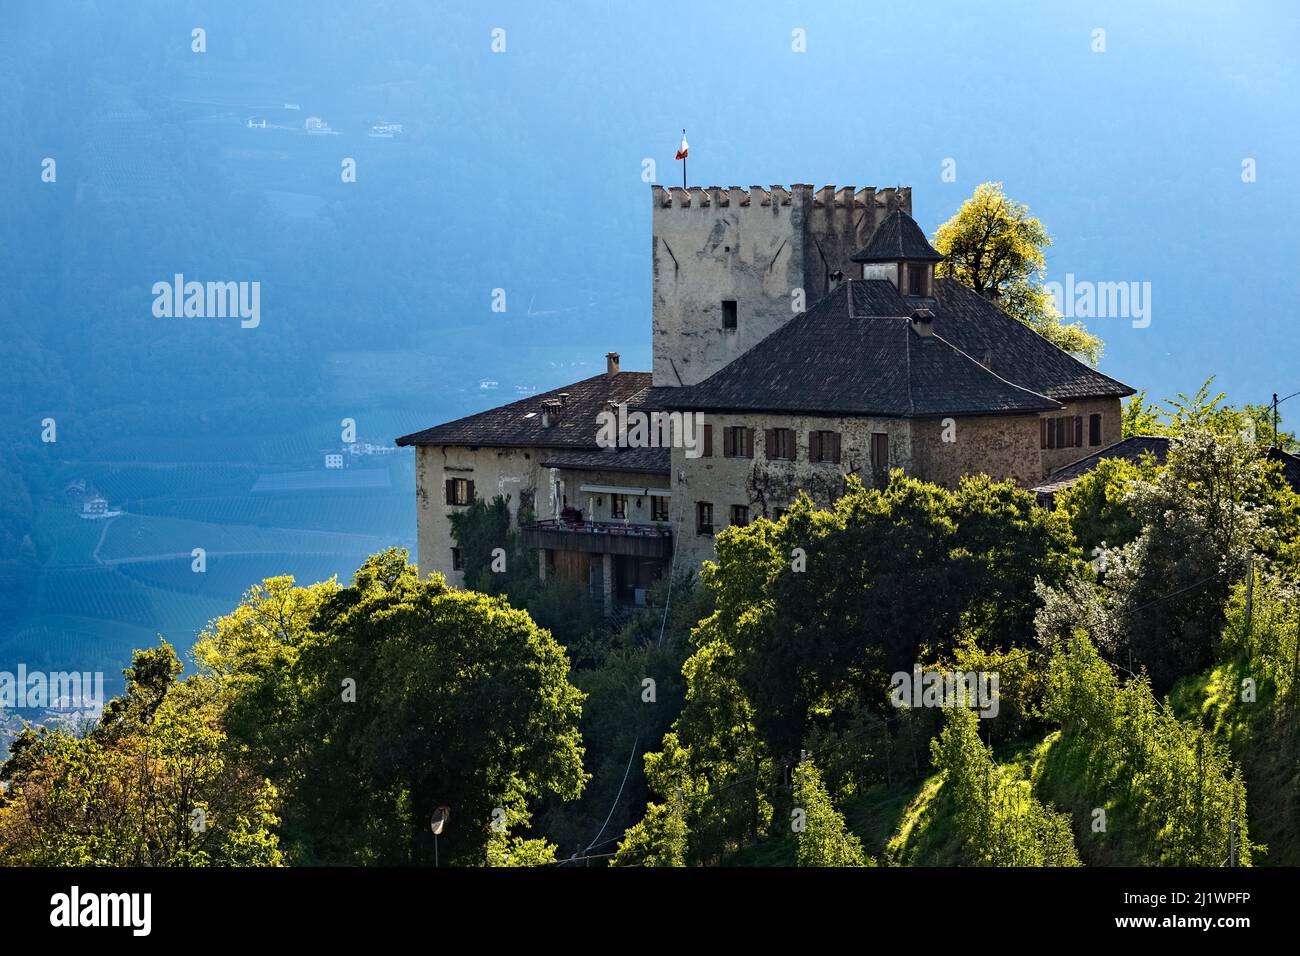 Thurnstein is a medieval castle perched on the slopes of Mount Muta. Today it is used as a Tyrolean hotel and restaurant. Tirolo,Alto Adige, Italy. Stock Photo